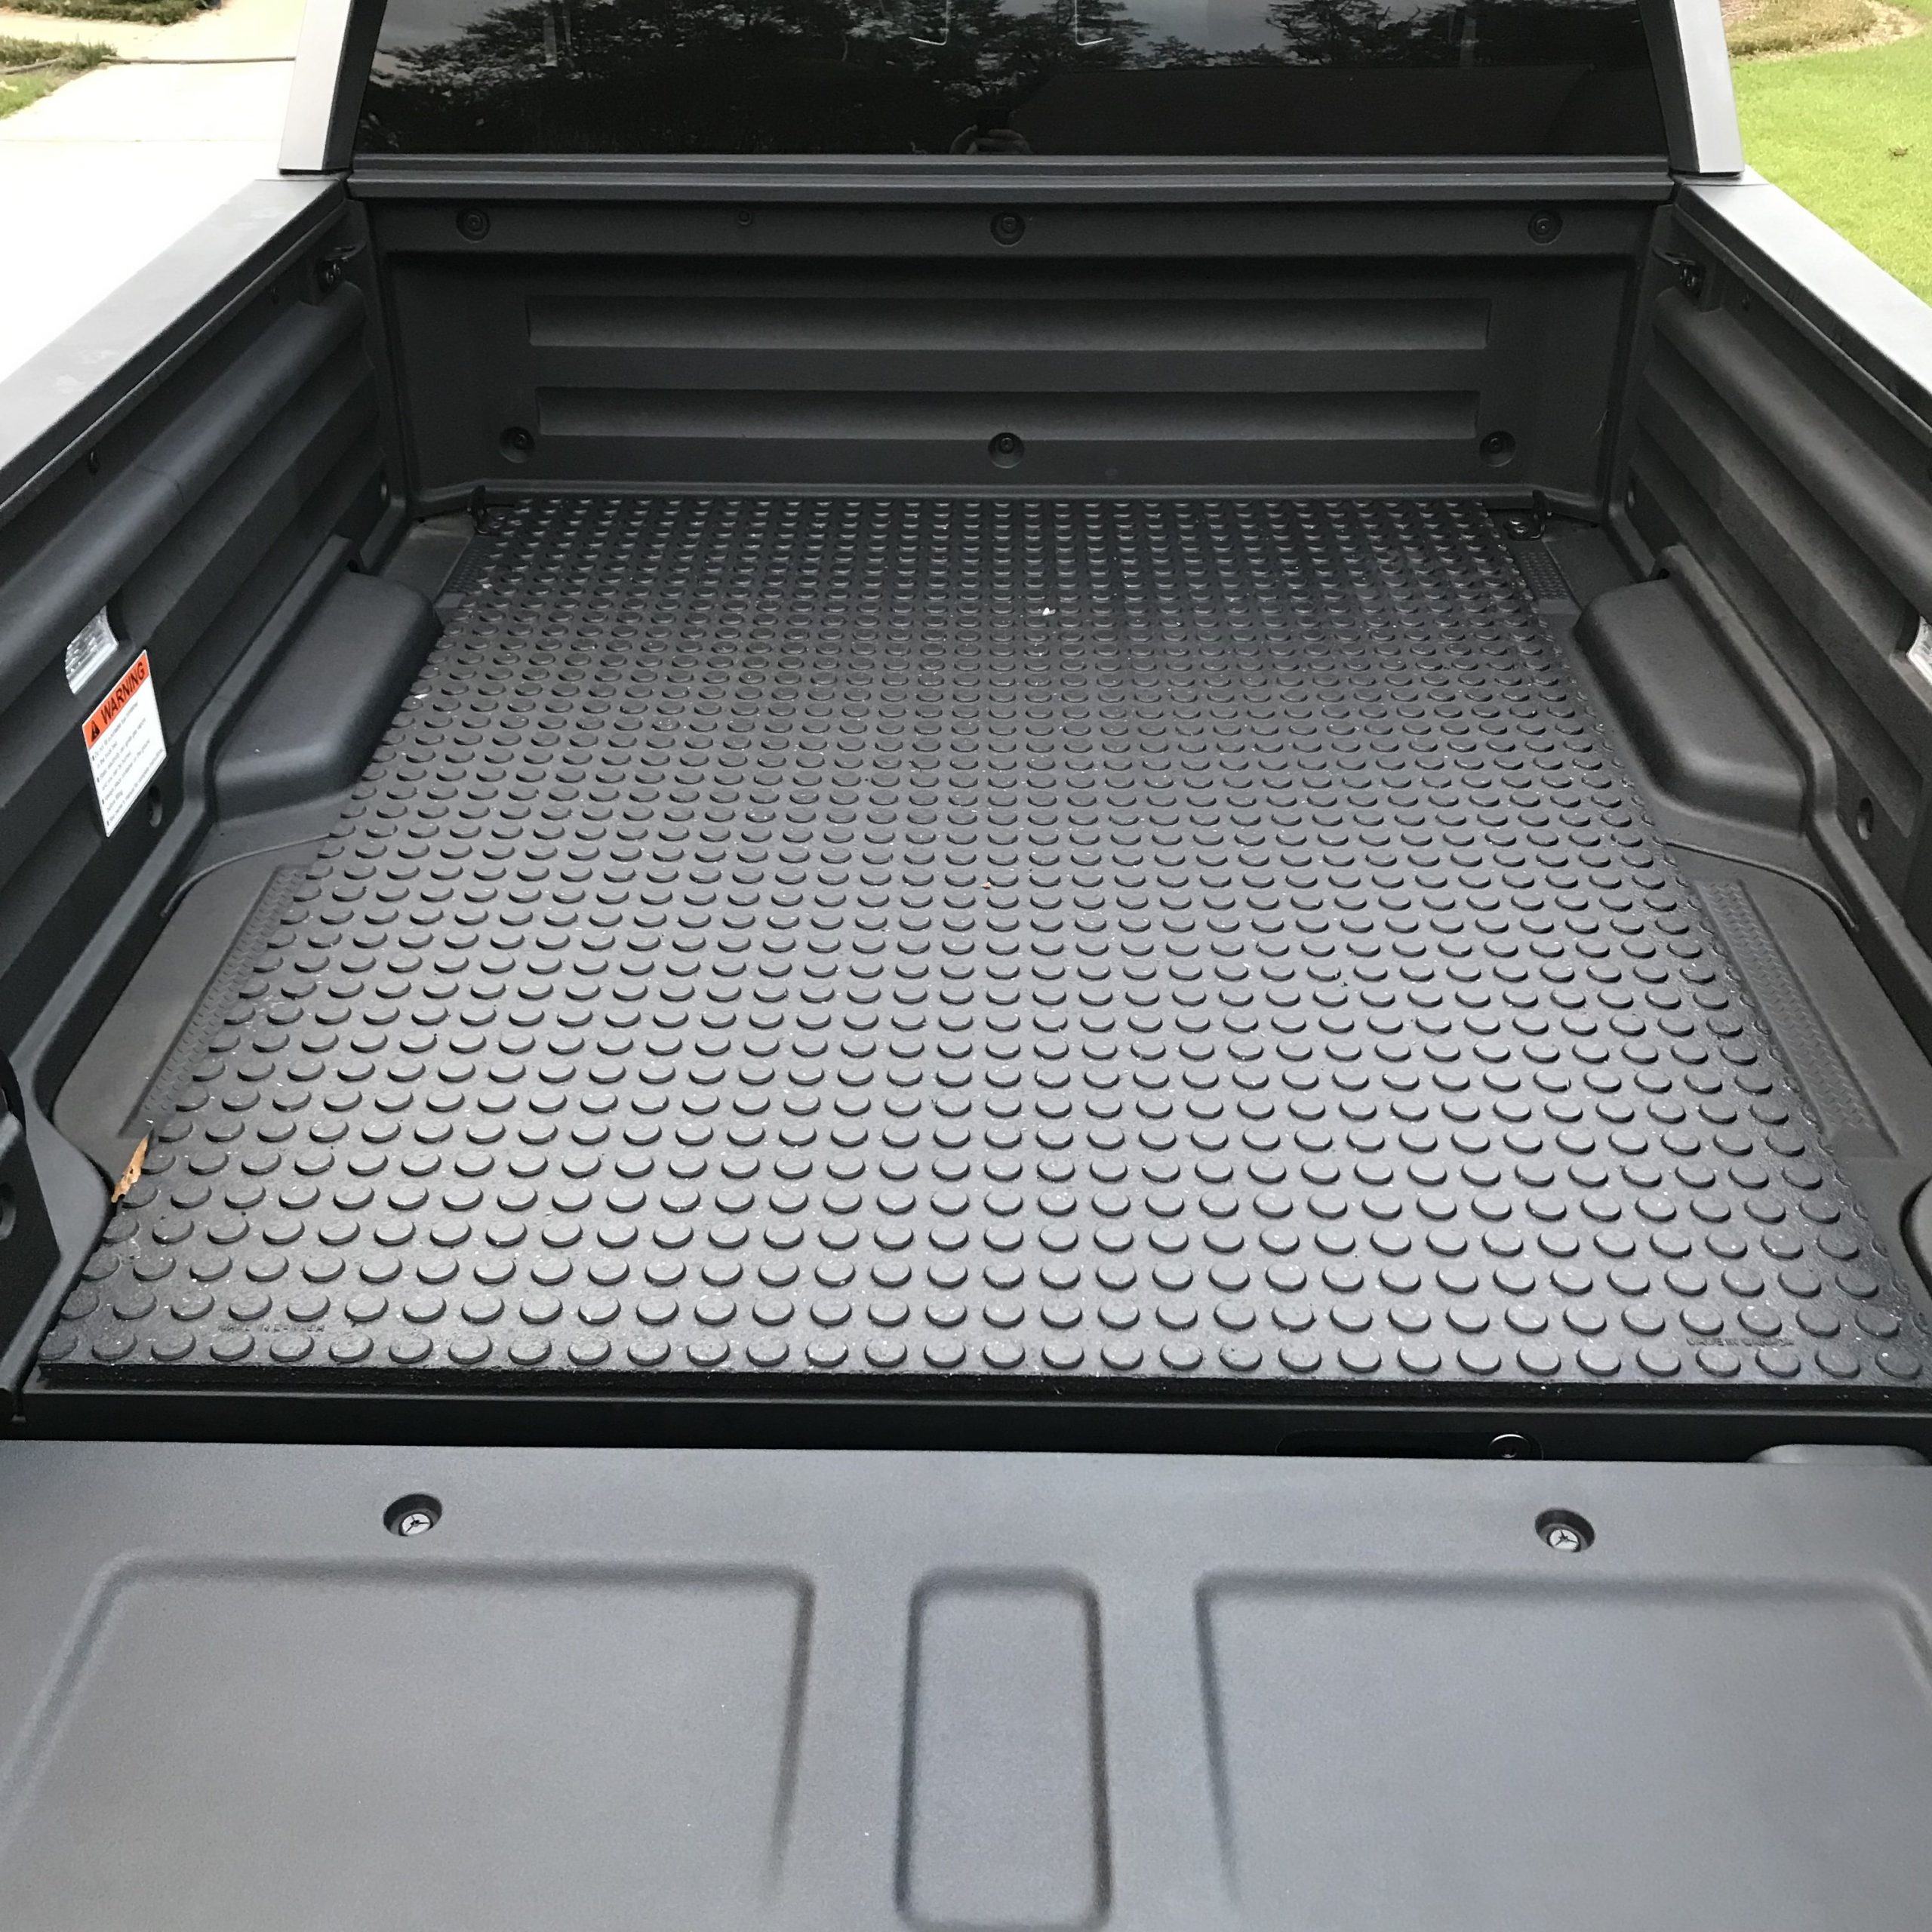 Used Bed Liner For Honda